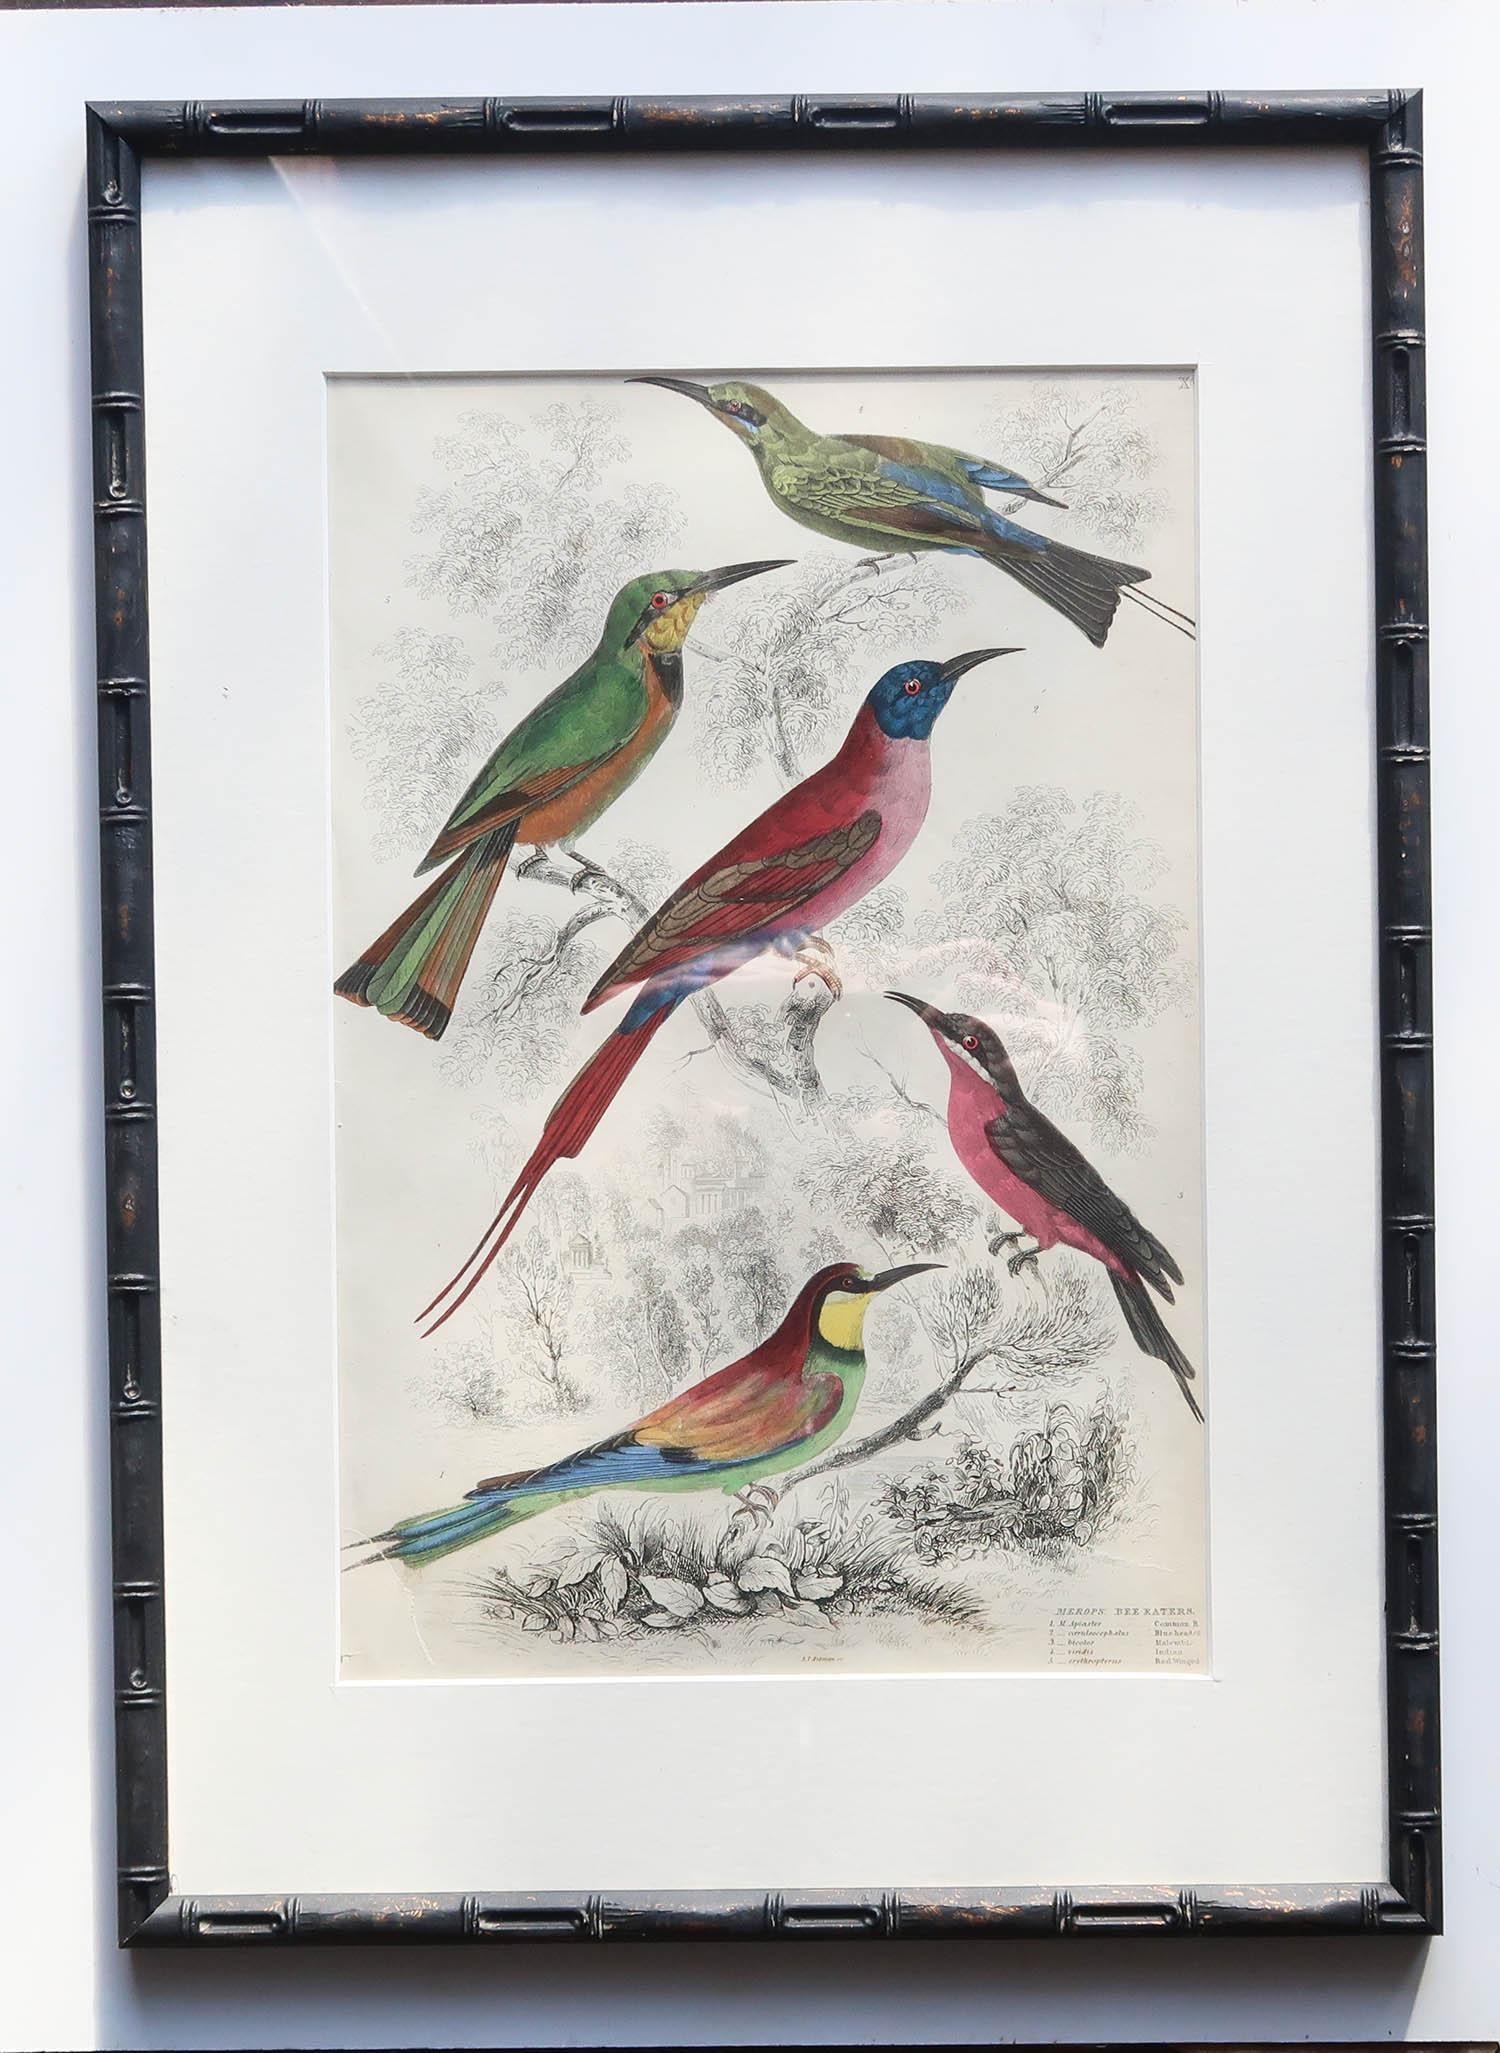 Wonderful set of 15 antique bird prints in exquisite bright original colors.

Presented in our own custom made ebonized faux bamboo frames.

Lithographs after the original drawings by Captain Brown. Original hand color.

Published, C.1835.

Free UK